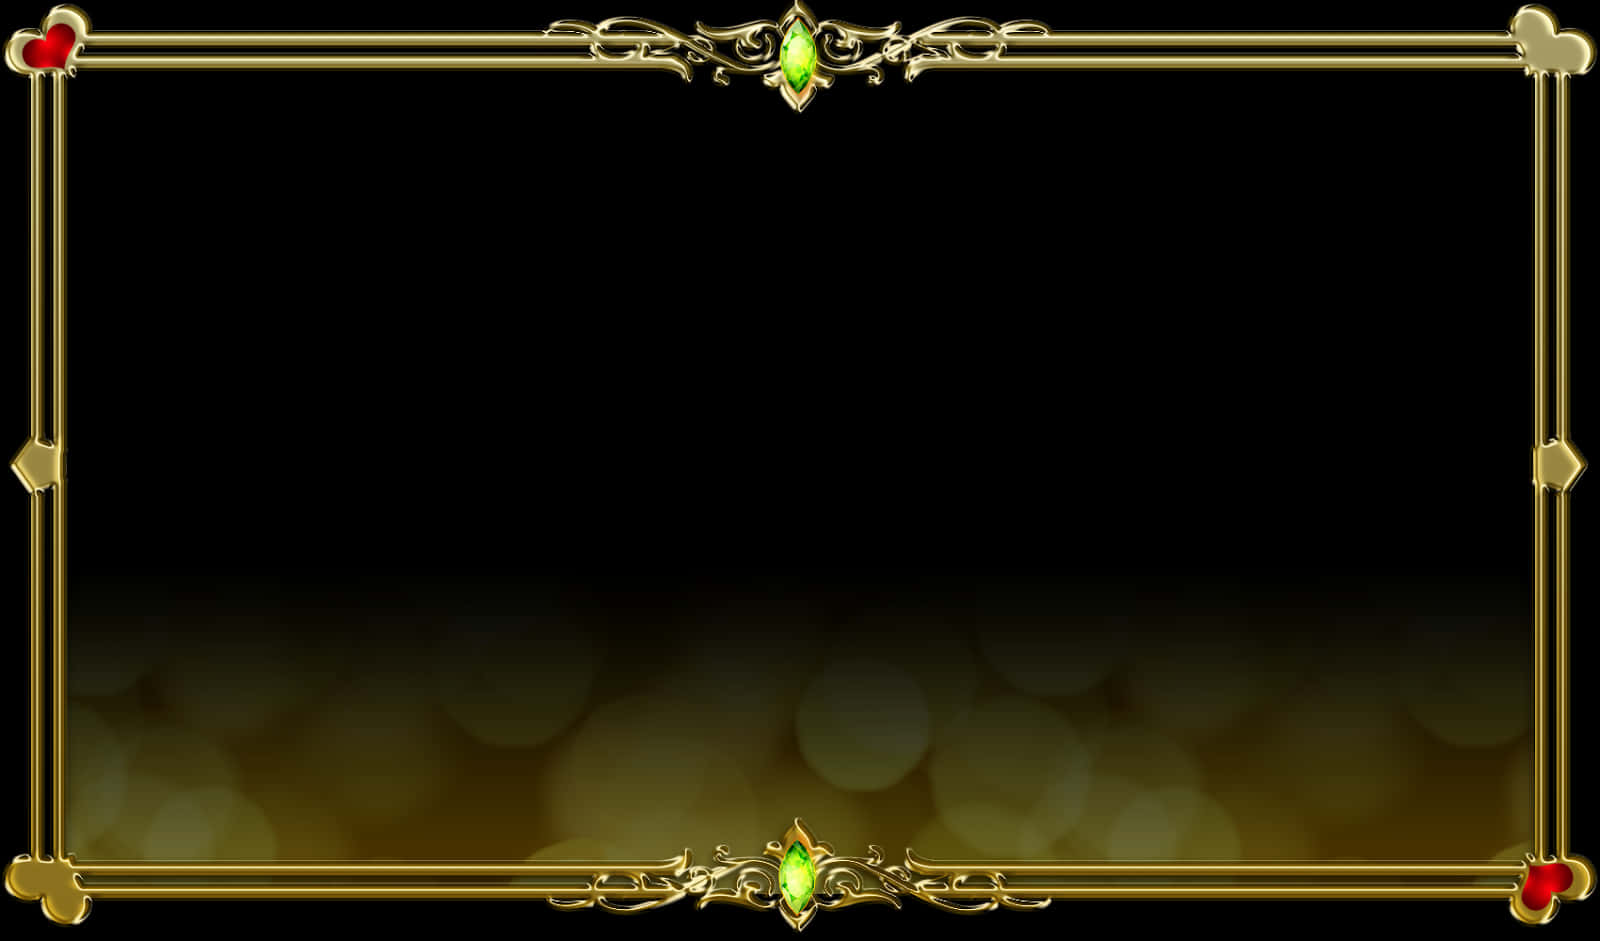 A Gold Frame With Green Gems On It